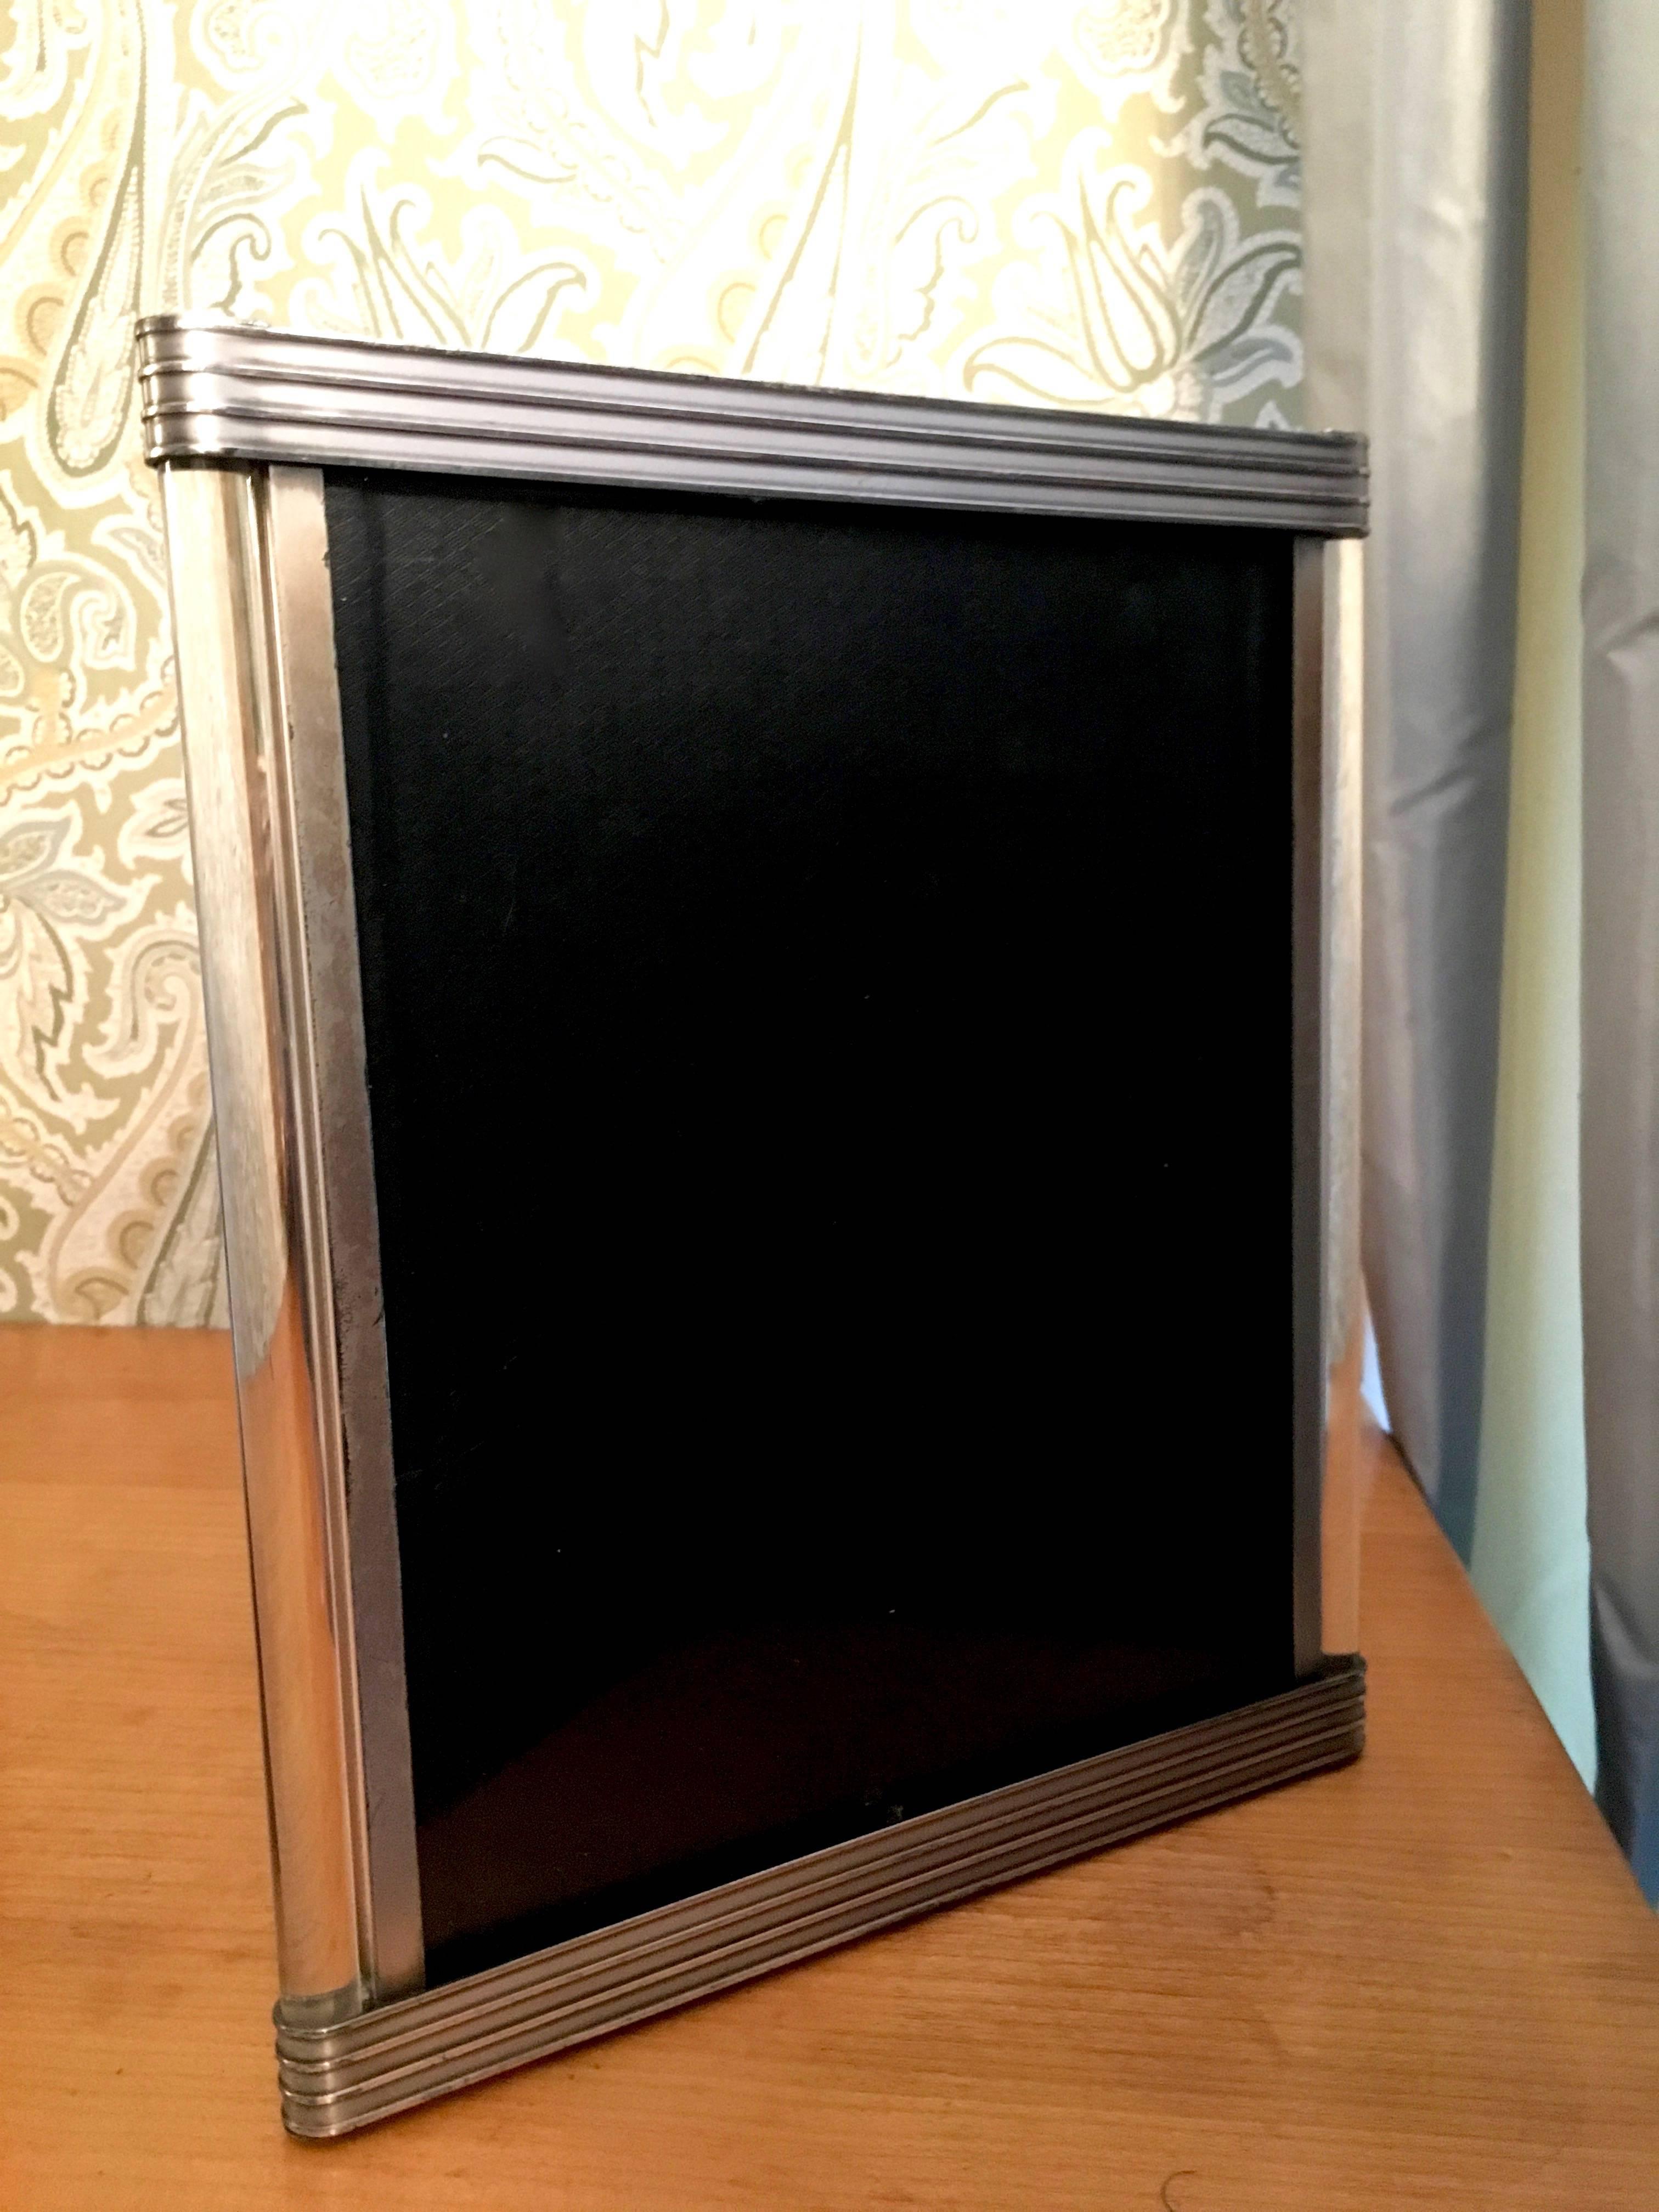 Art Deco measure: 8 x 10 picture frame with ribbed metal and glass rod details, a simple Art Deco style piece with a bit of age, and patina. The glass rods are in great condition. Darren Ransdell Design suggests a compliment to modern or vintage